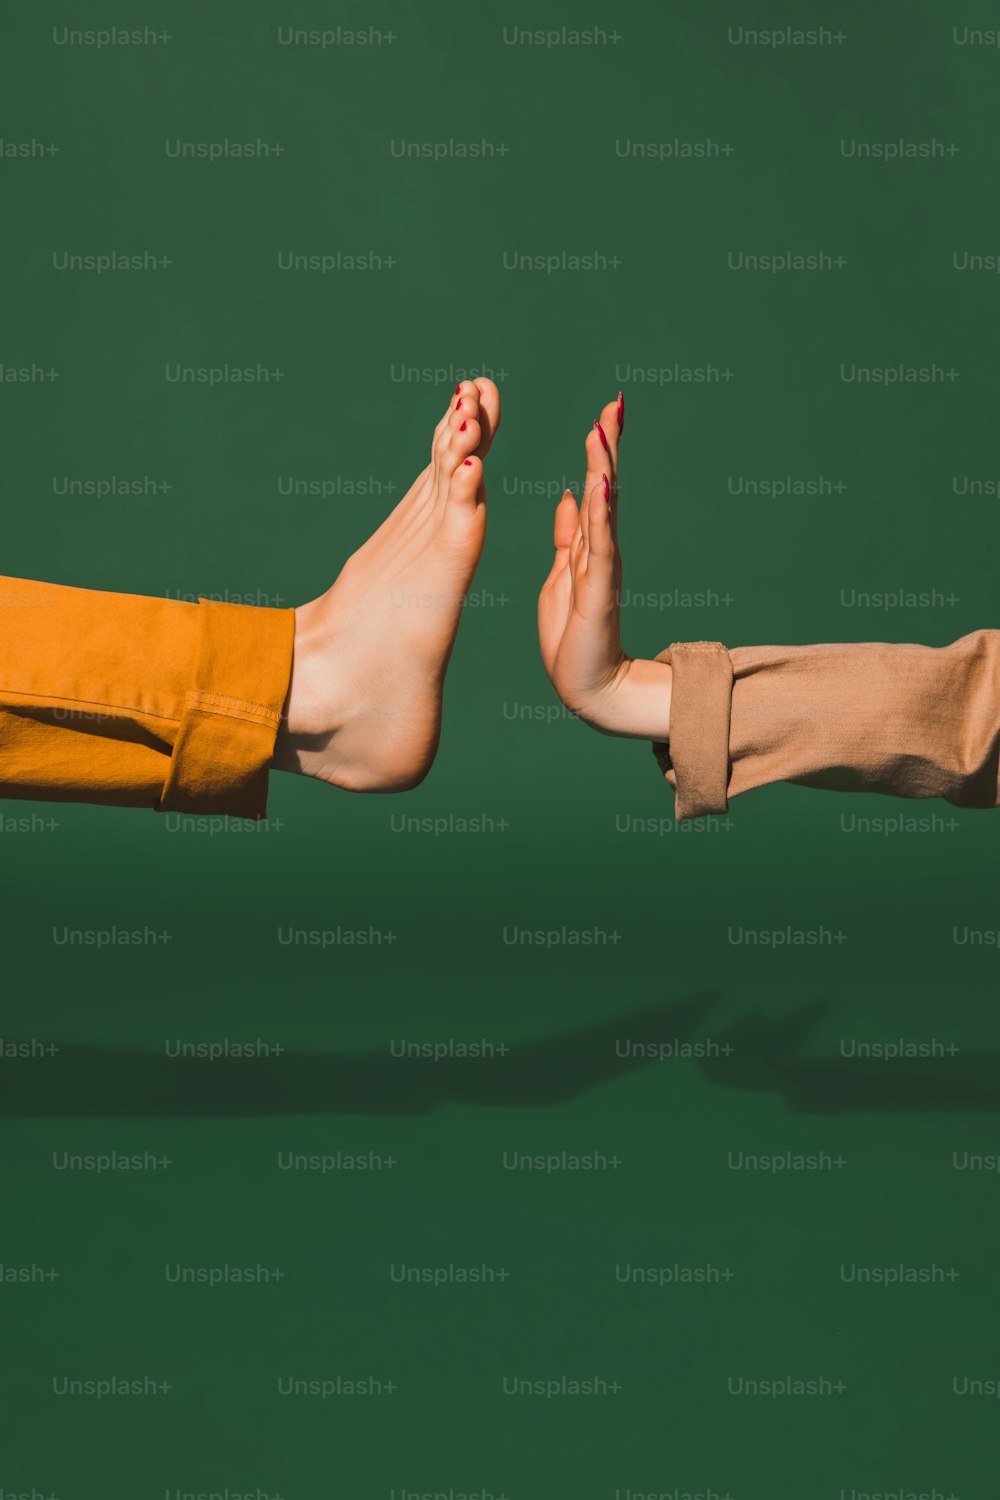 Clapping. Bright fashionable hand and leg working up daily things together. Modern artwork, contemporary art. Trendy colors, magazine style. Usual routine in unusual way. Green background.